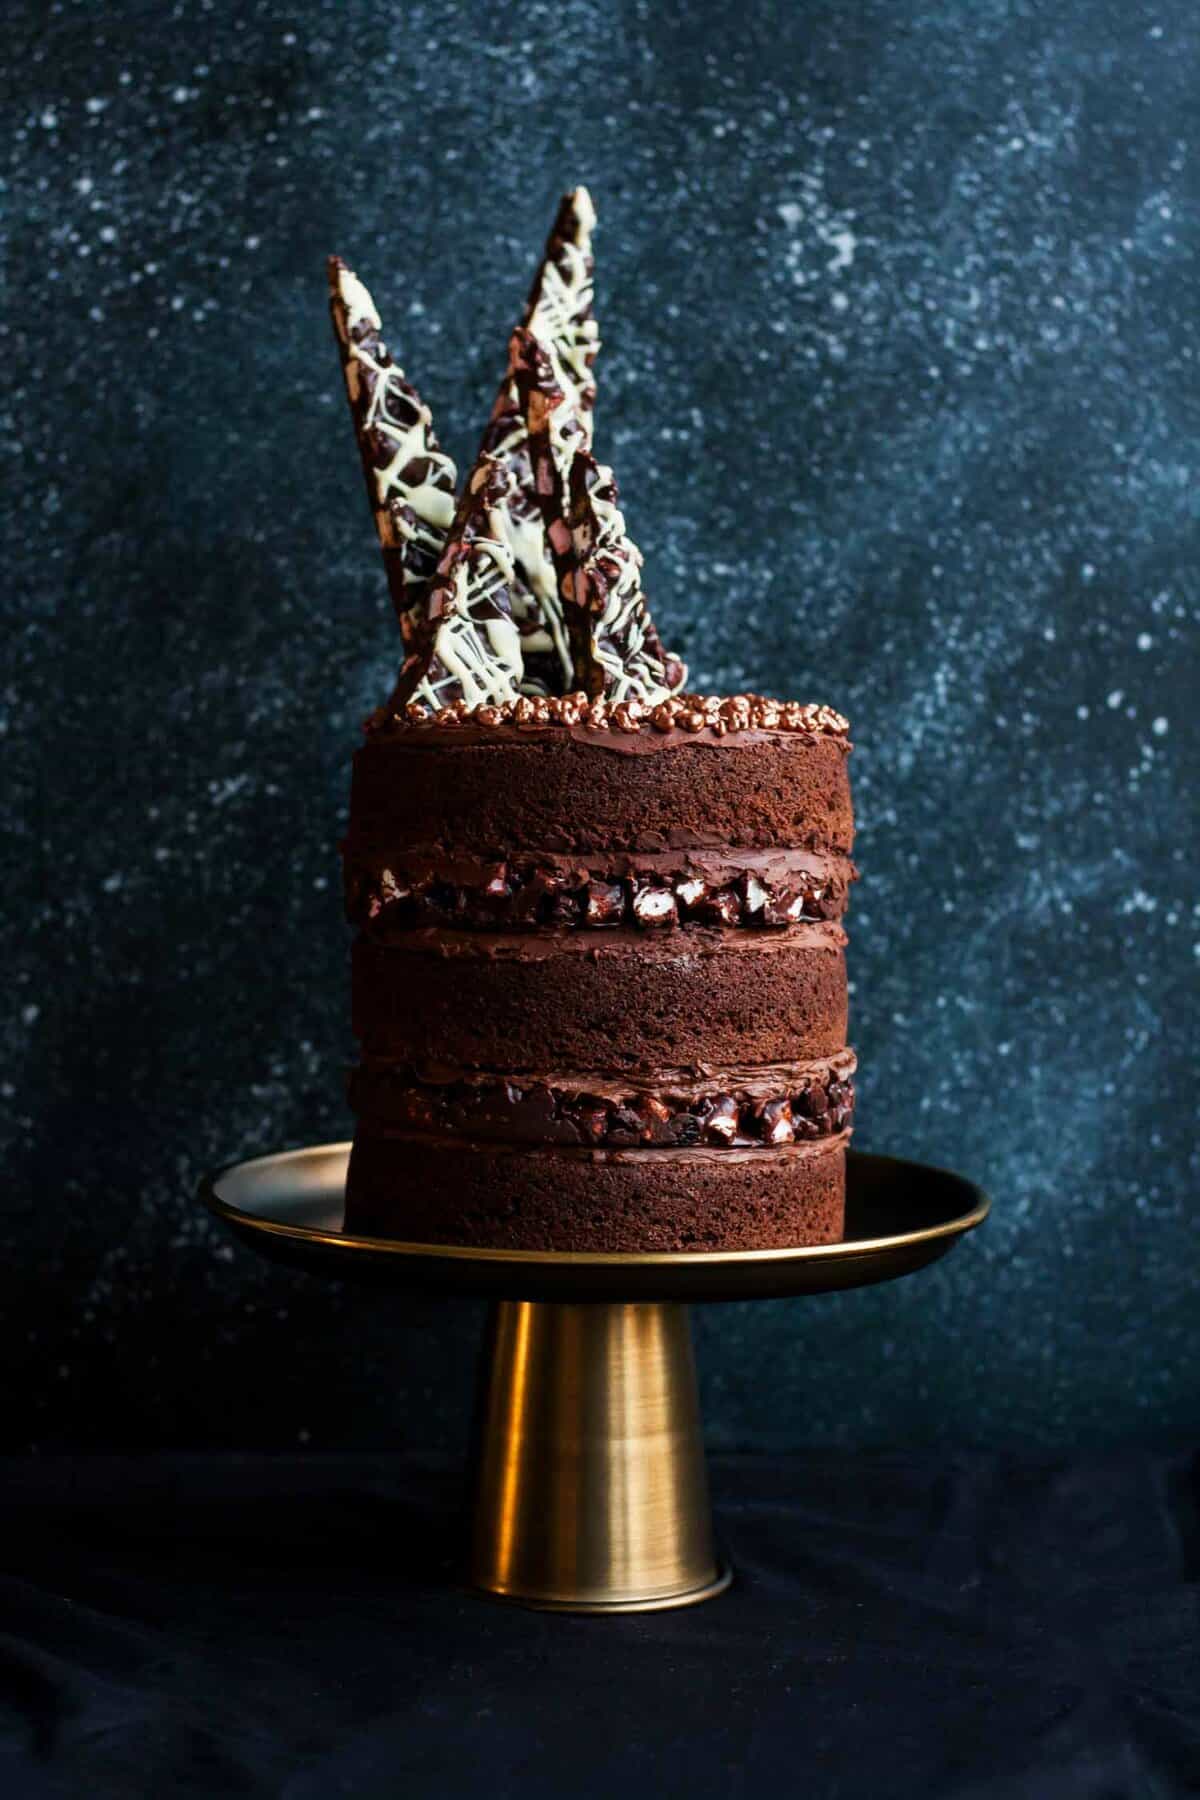 A triple layered chocolate rocky road layer cake with shards of rocky road on top.